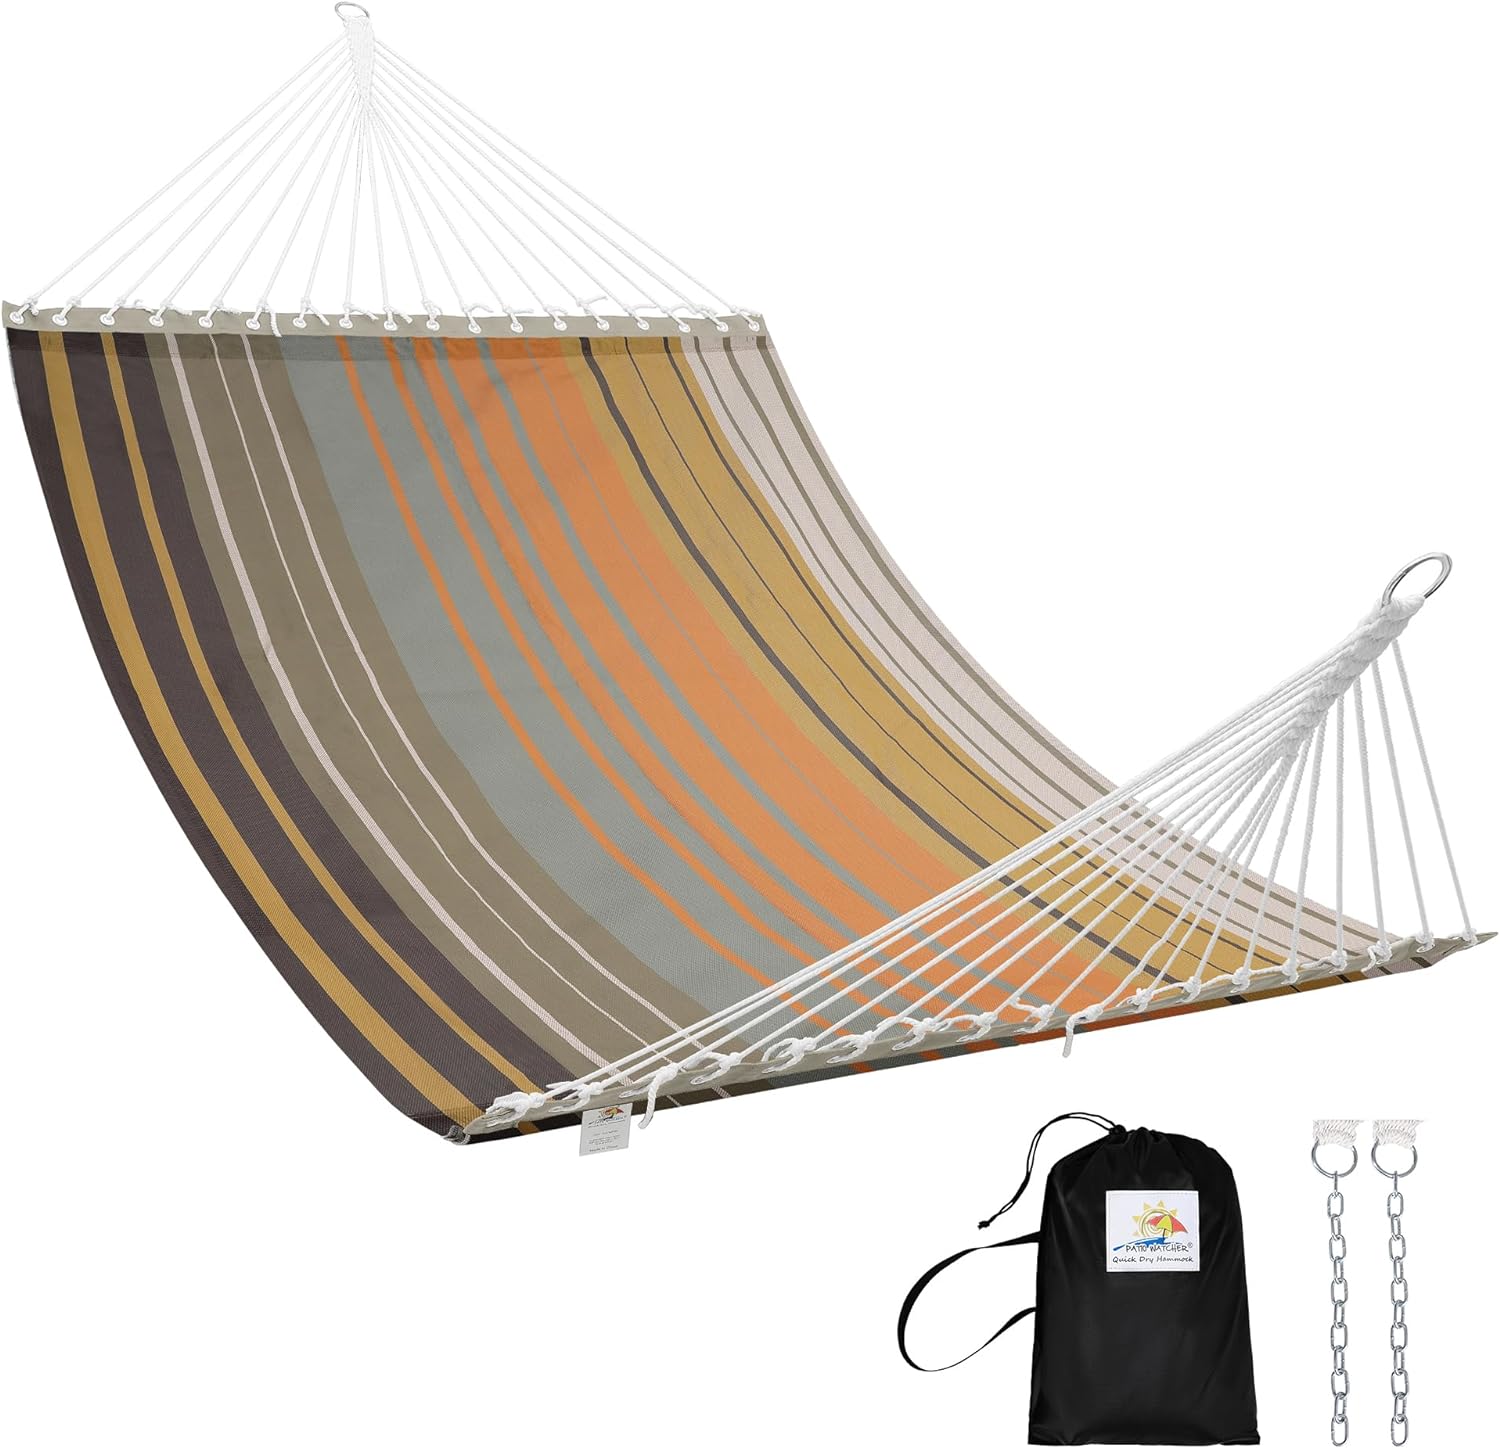 Patio Watcher 13 FT Double Quick Dry Hammock Folding Concealed Steel Spreader Bar Portable Two Person Hammock for Camping Outdoor Patio Yard Beach450 lbs CapacityCoffee